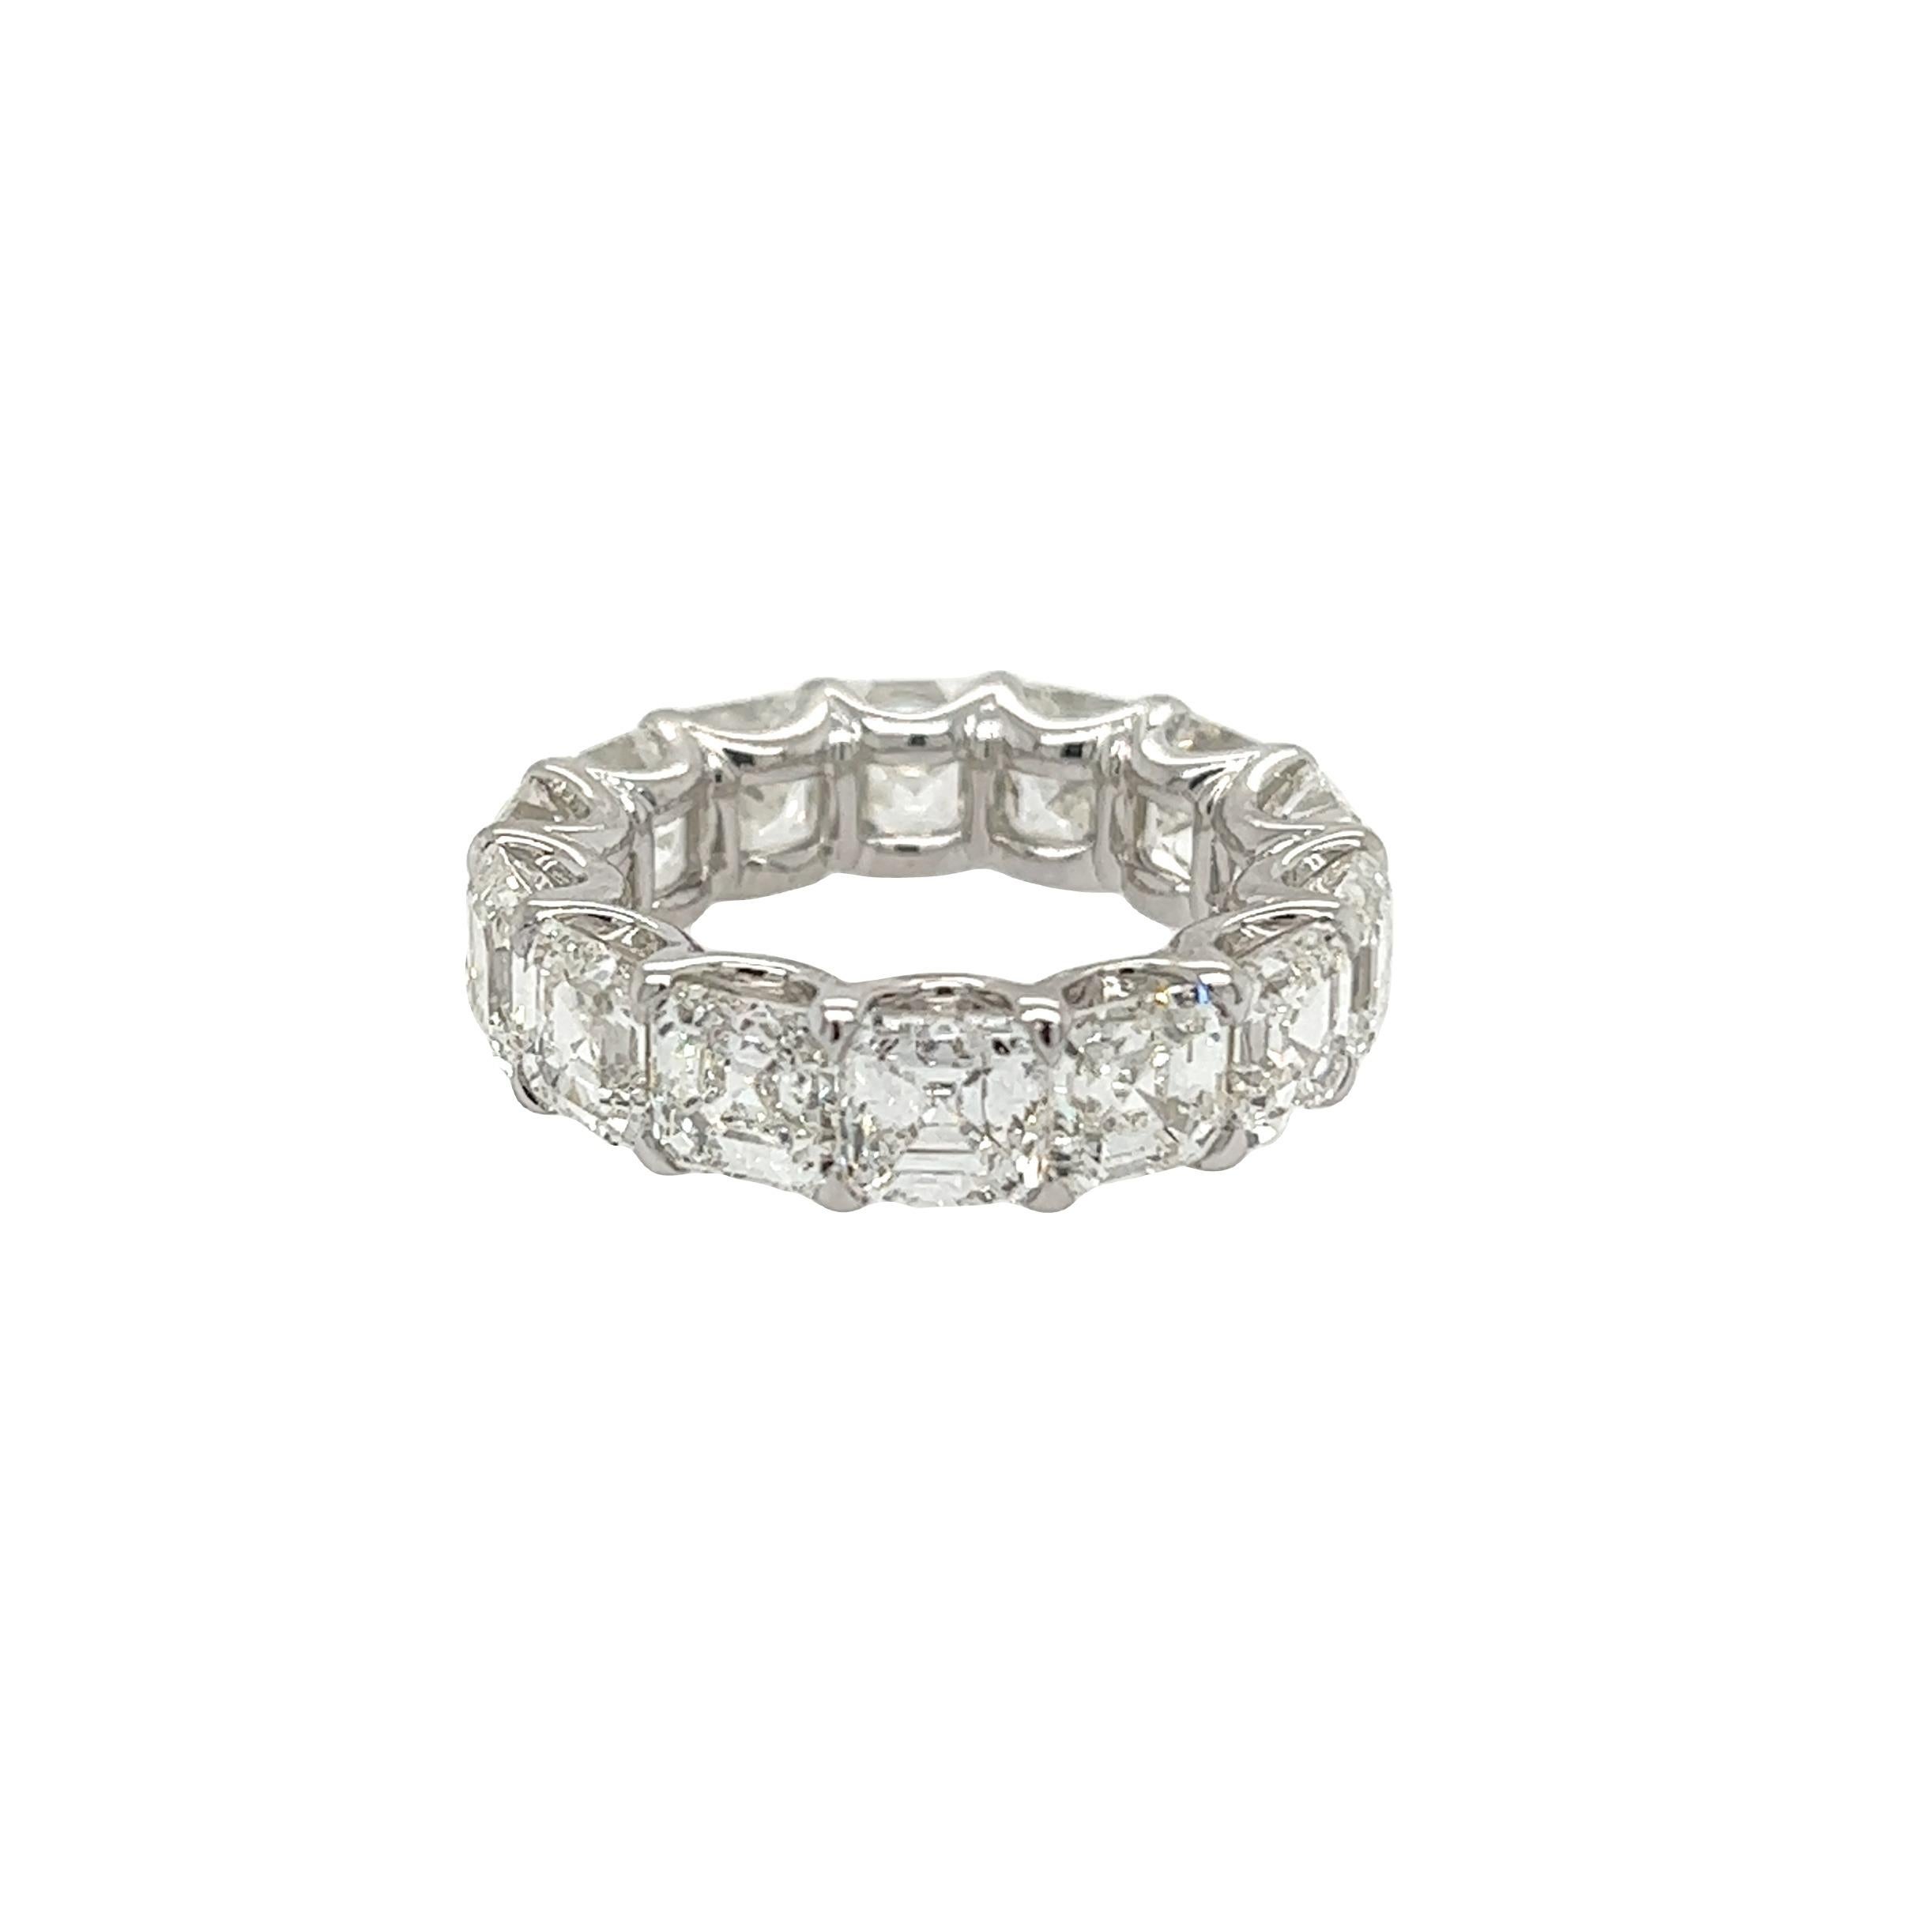 Rosenberg Diamonds & Co. 14.34 total carat weight Asscher cut diamond eternity band. This beautiful platinum airline eternity band has fourteen asscher cut diamonds ranging from F-G in color IF - VS2 in clarity with an average of just over one carat